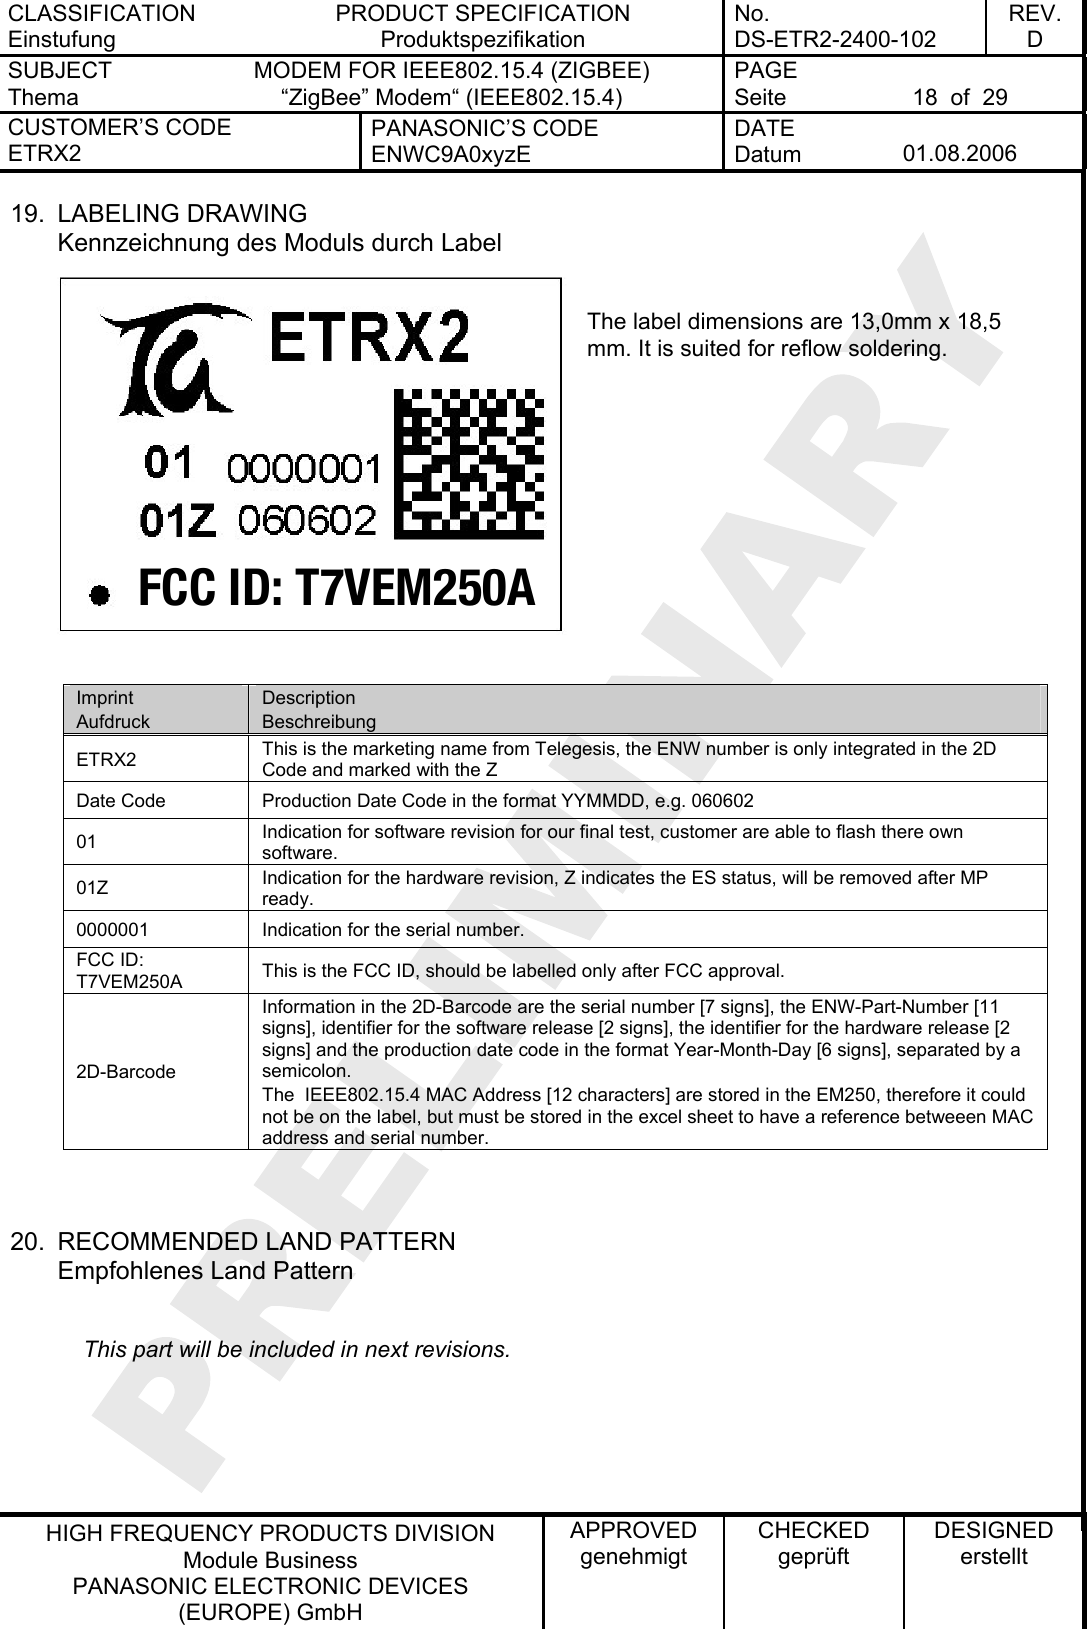 CLASSIFICATION Einstufung PRODUCT SPECIFICATION Produktspezifikation No. DS-ETR2-2400-102 REV. D SUBJECT Thema MODEM FOR IEEE802.15.4 (ZIGBEE) “ZigBee” Modem“ (IEEE802.15.4)   PAGE Seite  18  of  29 CUSTOMER’S CODE ETRX2 PANASONIC’S CODE ENWC9A0xyzE DATE Datum  01.08.2006   HIGH FREQUENCY PRODUCTS DIVISION Module Business PANASONIC ELECTRONIC DEVICES  (EUROPE) GmbH APPROVED genehmigt CHECKED geprüft DESIGNED erstellt 19. LABELING DRAWING Kennzeichnung des Moduls durch Label FCC ID: T7VEM250A The label dimensions are 13,0mm x 18,5 mm. It is suited for reflow soldering.         Imprint Aufdruck Description Beschreibung ETRX2  This is the marketing name from Telegesis, the ENW number is only integrated in the 2D Code and marked with the Z Date Code  Production Date Code in the format YYMMDD, e.g. 060602 01  Indication for software revision for our final test, customer are able to flash there own software. 01Z  Indication for the hardware revision, Z indicates the ES status, will be removed after MP ready. 0000001  Indication for the serial number. FCC ID: T7VEM250A  This is the FCC ID, should be labelled only after FCC approval. 2D-Barcode Information in the 2D-Barcode are the serial number [7 signs], the ENW-Part-Number [11 signs], identifier for the software release [2 signs], the identifier for the hardware release [2 signs] and the production date code in the format Year-Month-Day [6 signs], separated by a semicolon. The  IEEE802.15.4 MAC Address [12 characters] are stored in the EM250, therefore it could not be on the label, but must be stored in the excel sheet to have a reference betweeen MAC address and serial number.   20.  RECOMMENDED LAND PATTERN Empfohlenes Land Pattern       This part will be included in next revisions.  